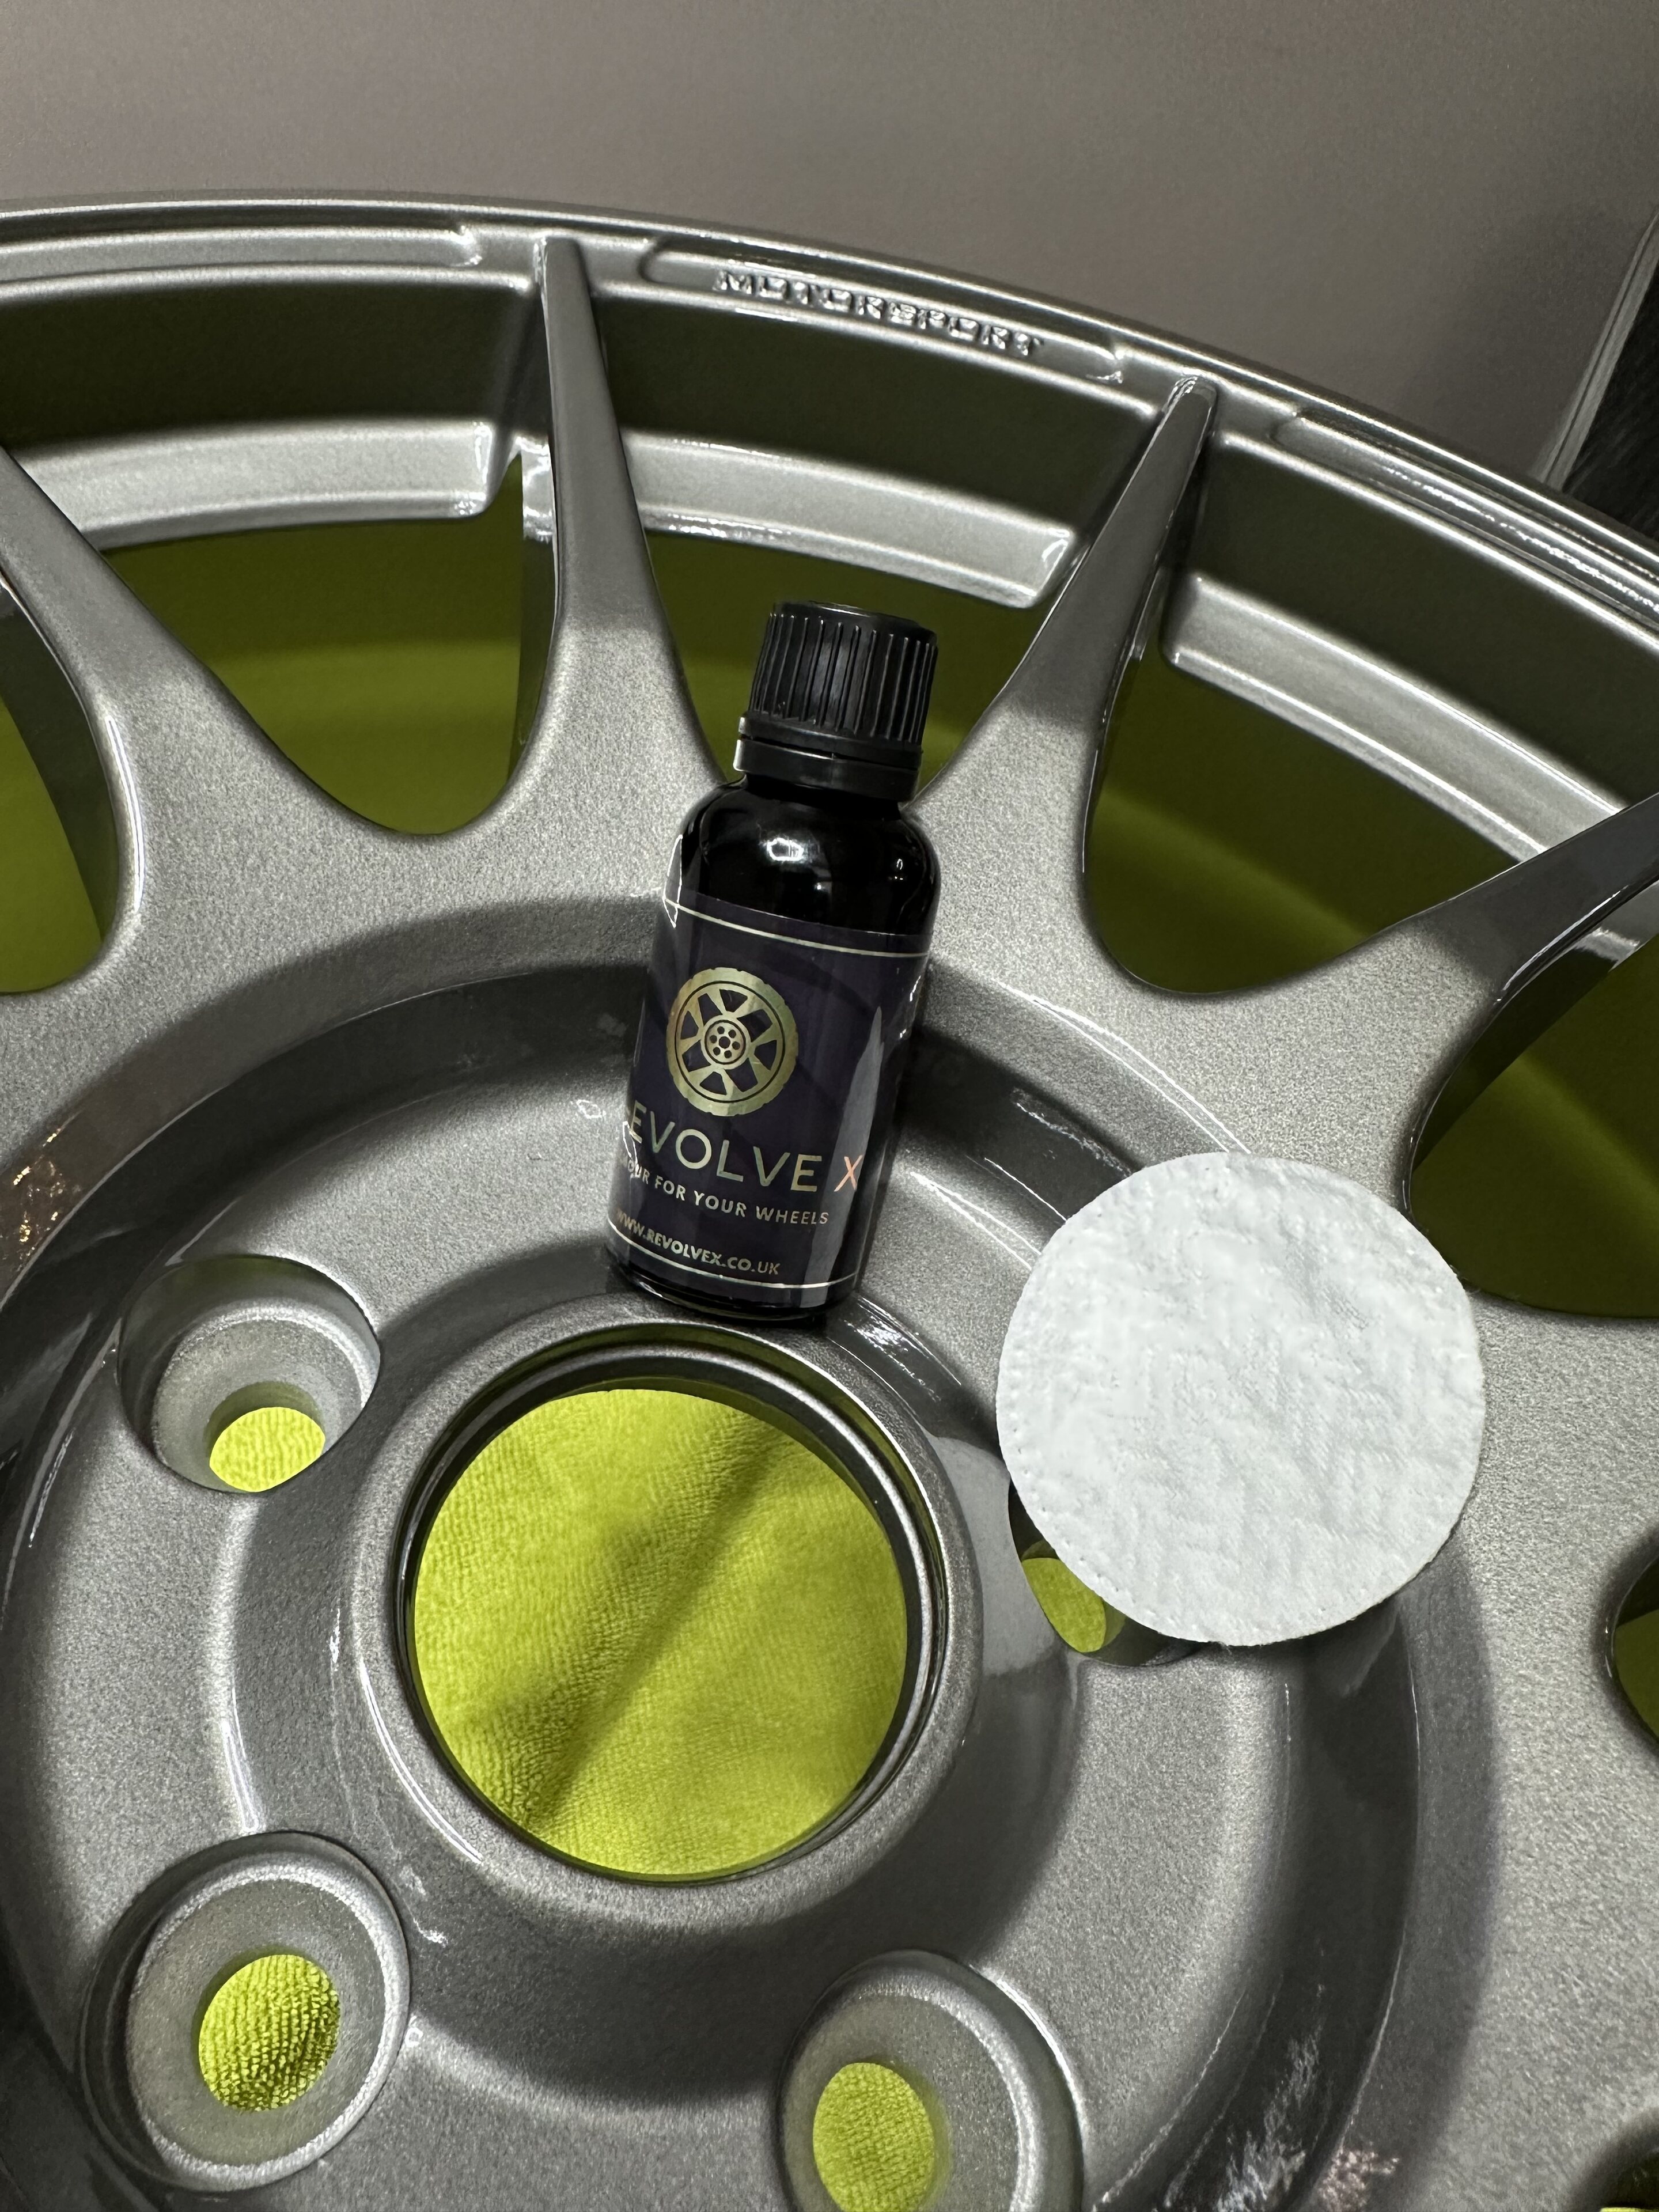 Pistonheads - The image presents a scene involving car wheels and a bottle of oil. In the foreground, there is a single silver car wheel with a visible yellow sticker on its center hub. On top of this wheel, there is a small dark-colored bottle, which appears to be an oil for wheels or a similar automotive product. The label on the bottle is facing upwards and seems to contain text, although it's not clearly legible in the image.

The wheel is placed inside a circular object that resembles a car rim, with visible silver spokes suggesting its design. This object has a black background, which provides a stark contrast to the wheel and bottle. The overall setting of this image seems to be a garage or workshop, as indicated by the presence of what appears to be a workbench in the background.

The image is taken from an elevated angle, looking down upon the wheel and bottle, which gives a clear view of their details. The lighting in the scene casts soft shadows around the wheel, indicating that the light source is coming from above and at an angle. This creates a sense of depth in the image, with the light creating subtle highlights on the car wheel and the oil bottle.